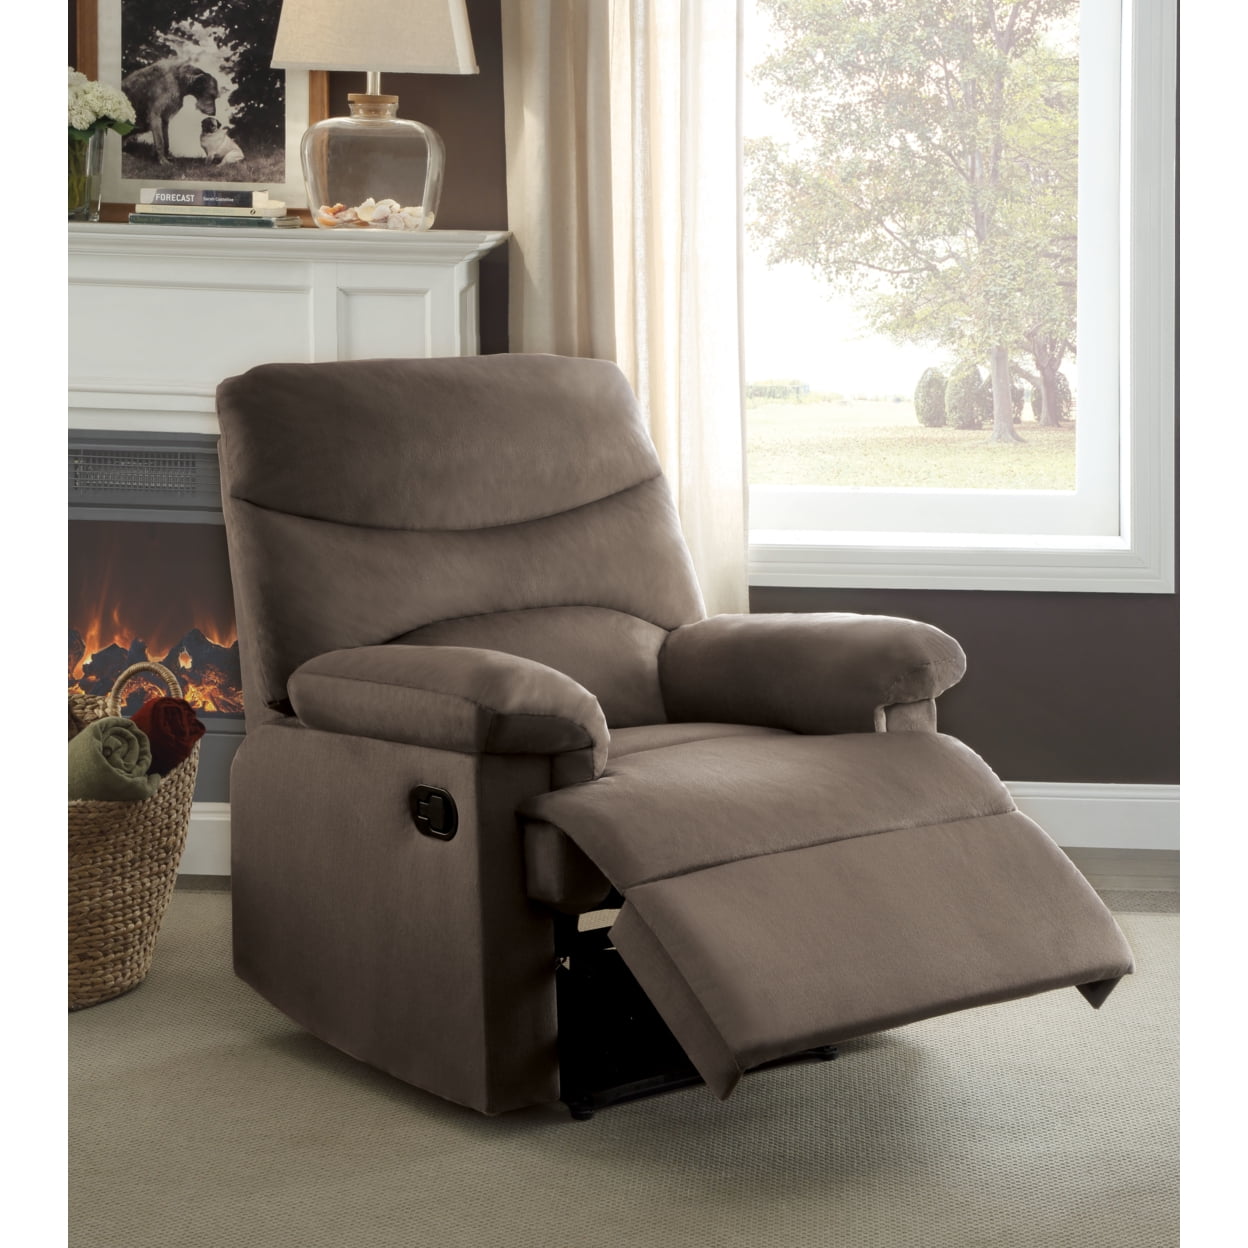 Picture of ACME 00703 Arcadia Recliner - Light Brown Woven Fabric